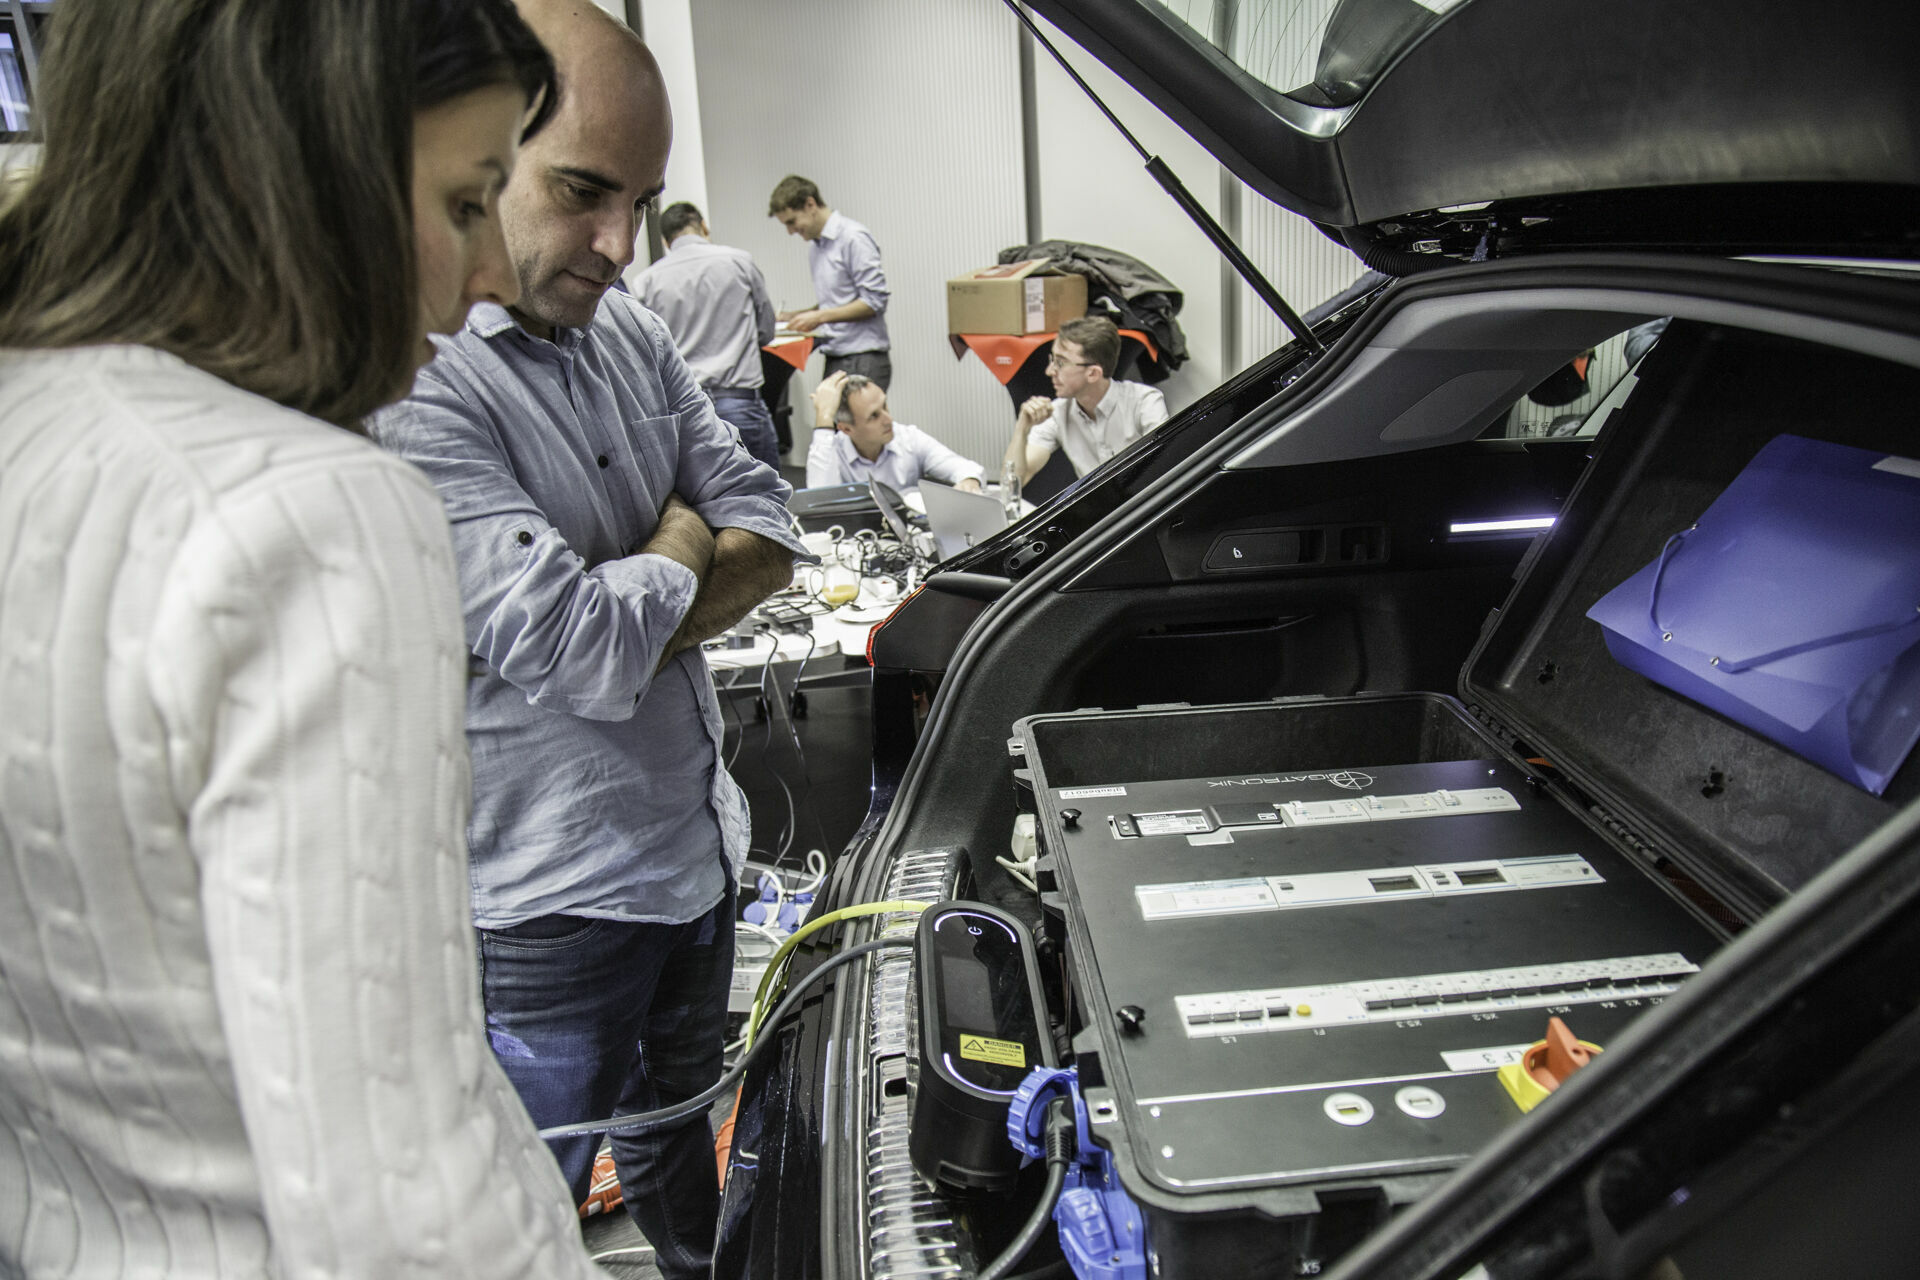 “Plugfest E-Mobility” at Audi Brussels